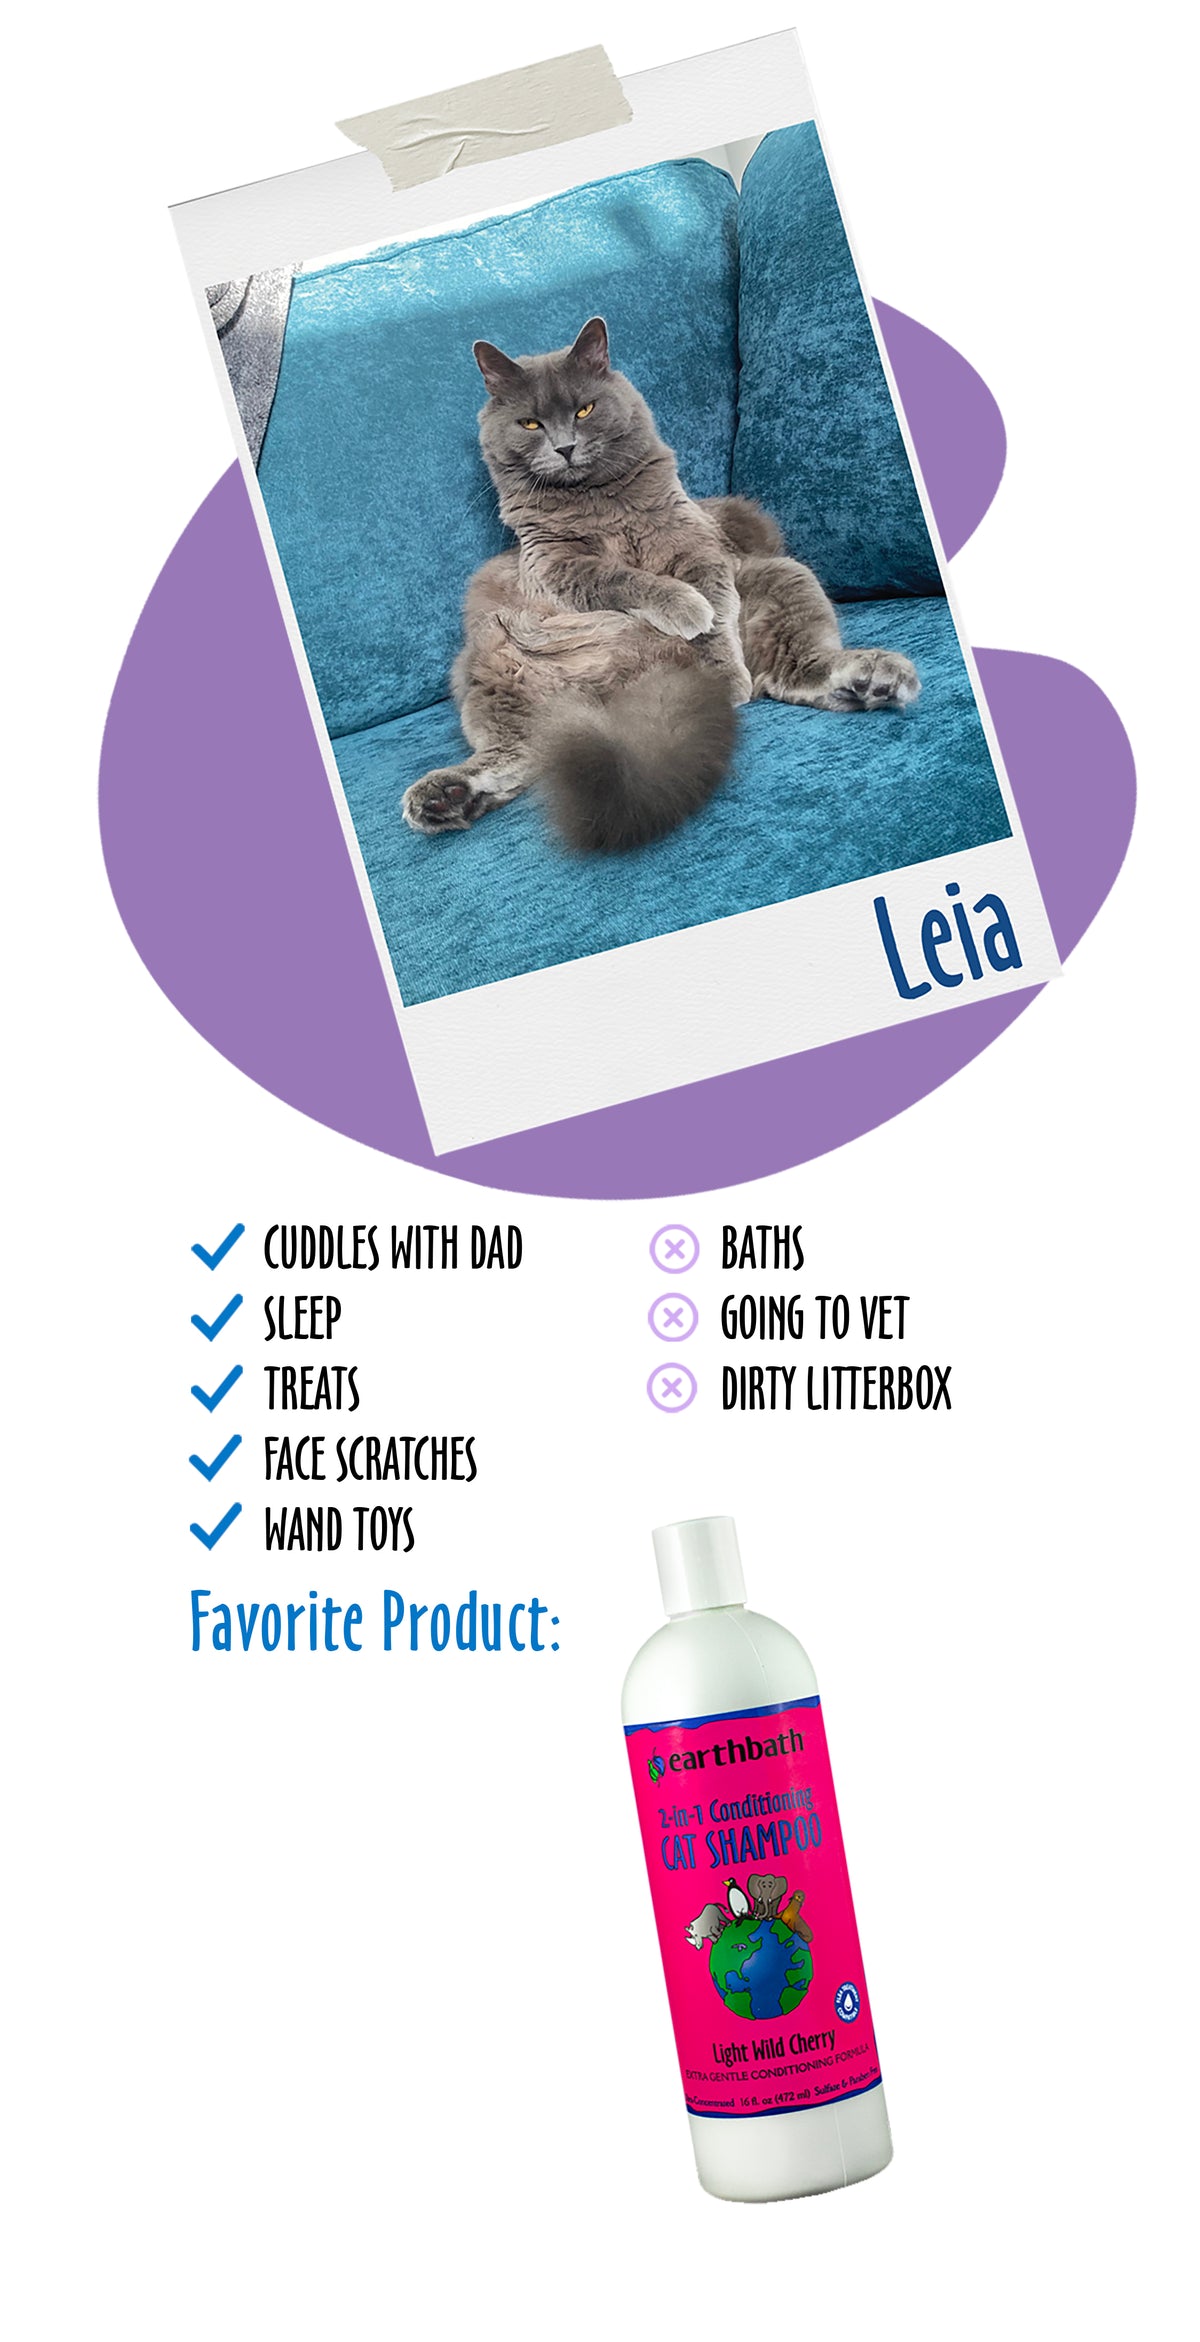 Leia loves 2-in-1 Conditioning Cat Shampoo